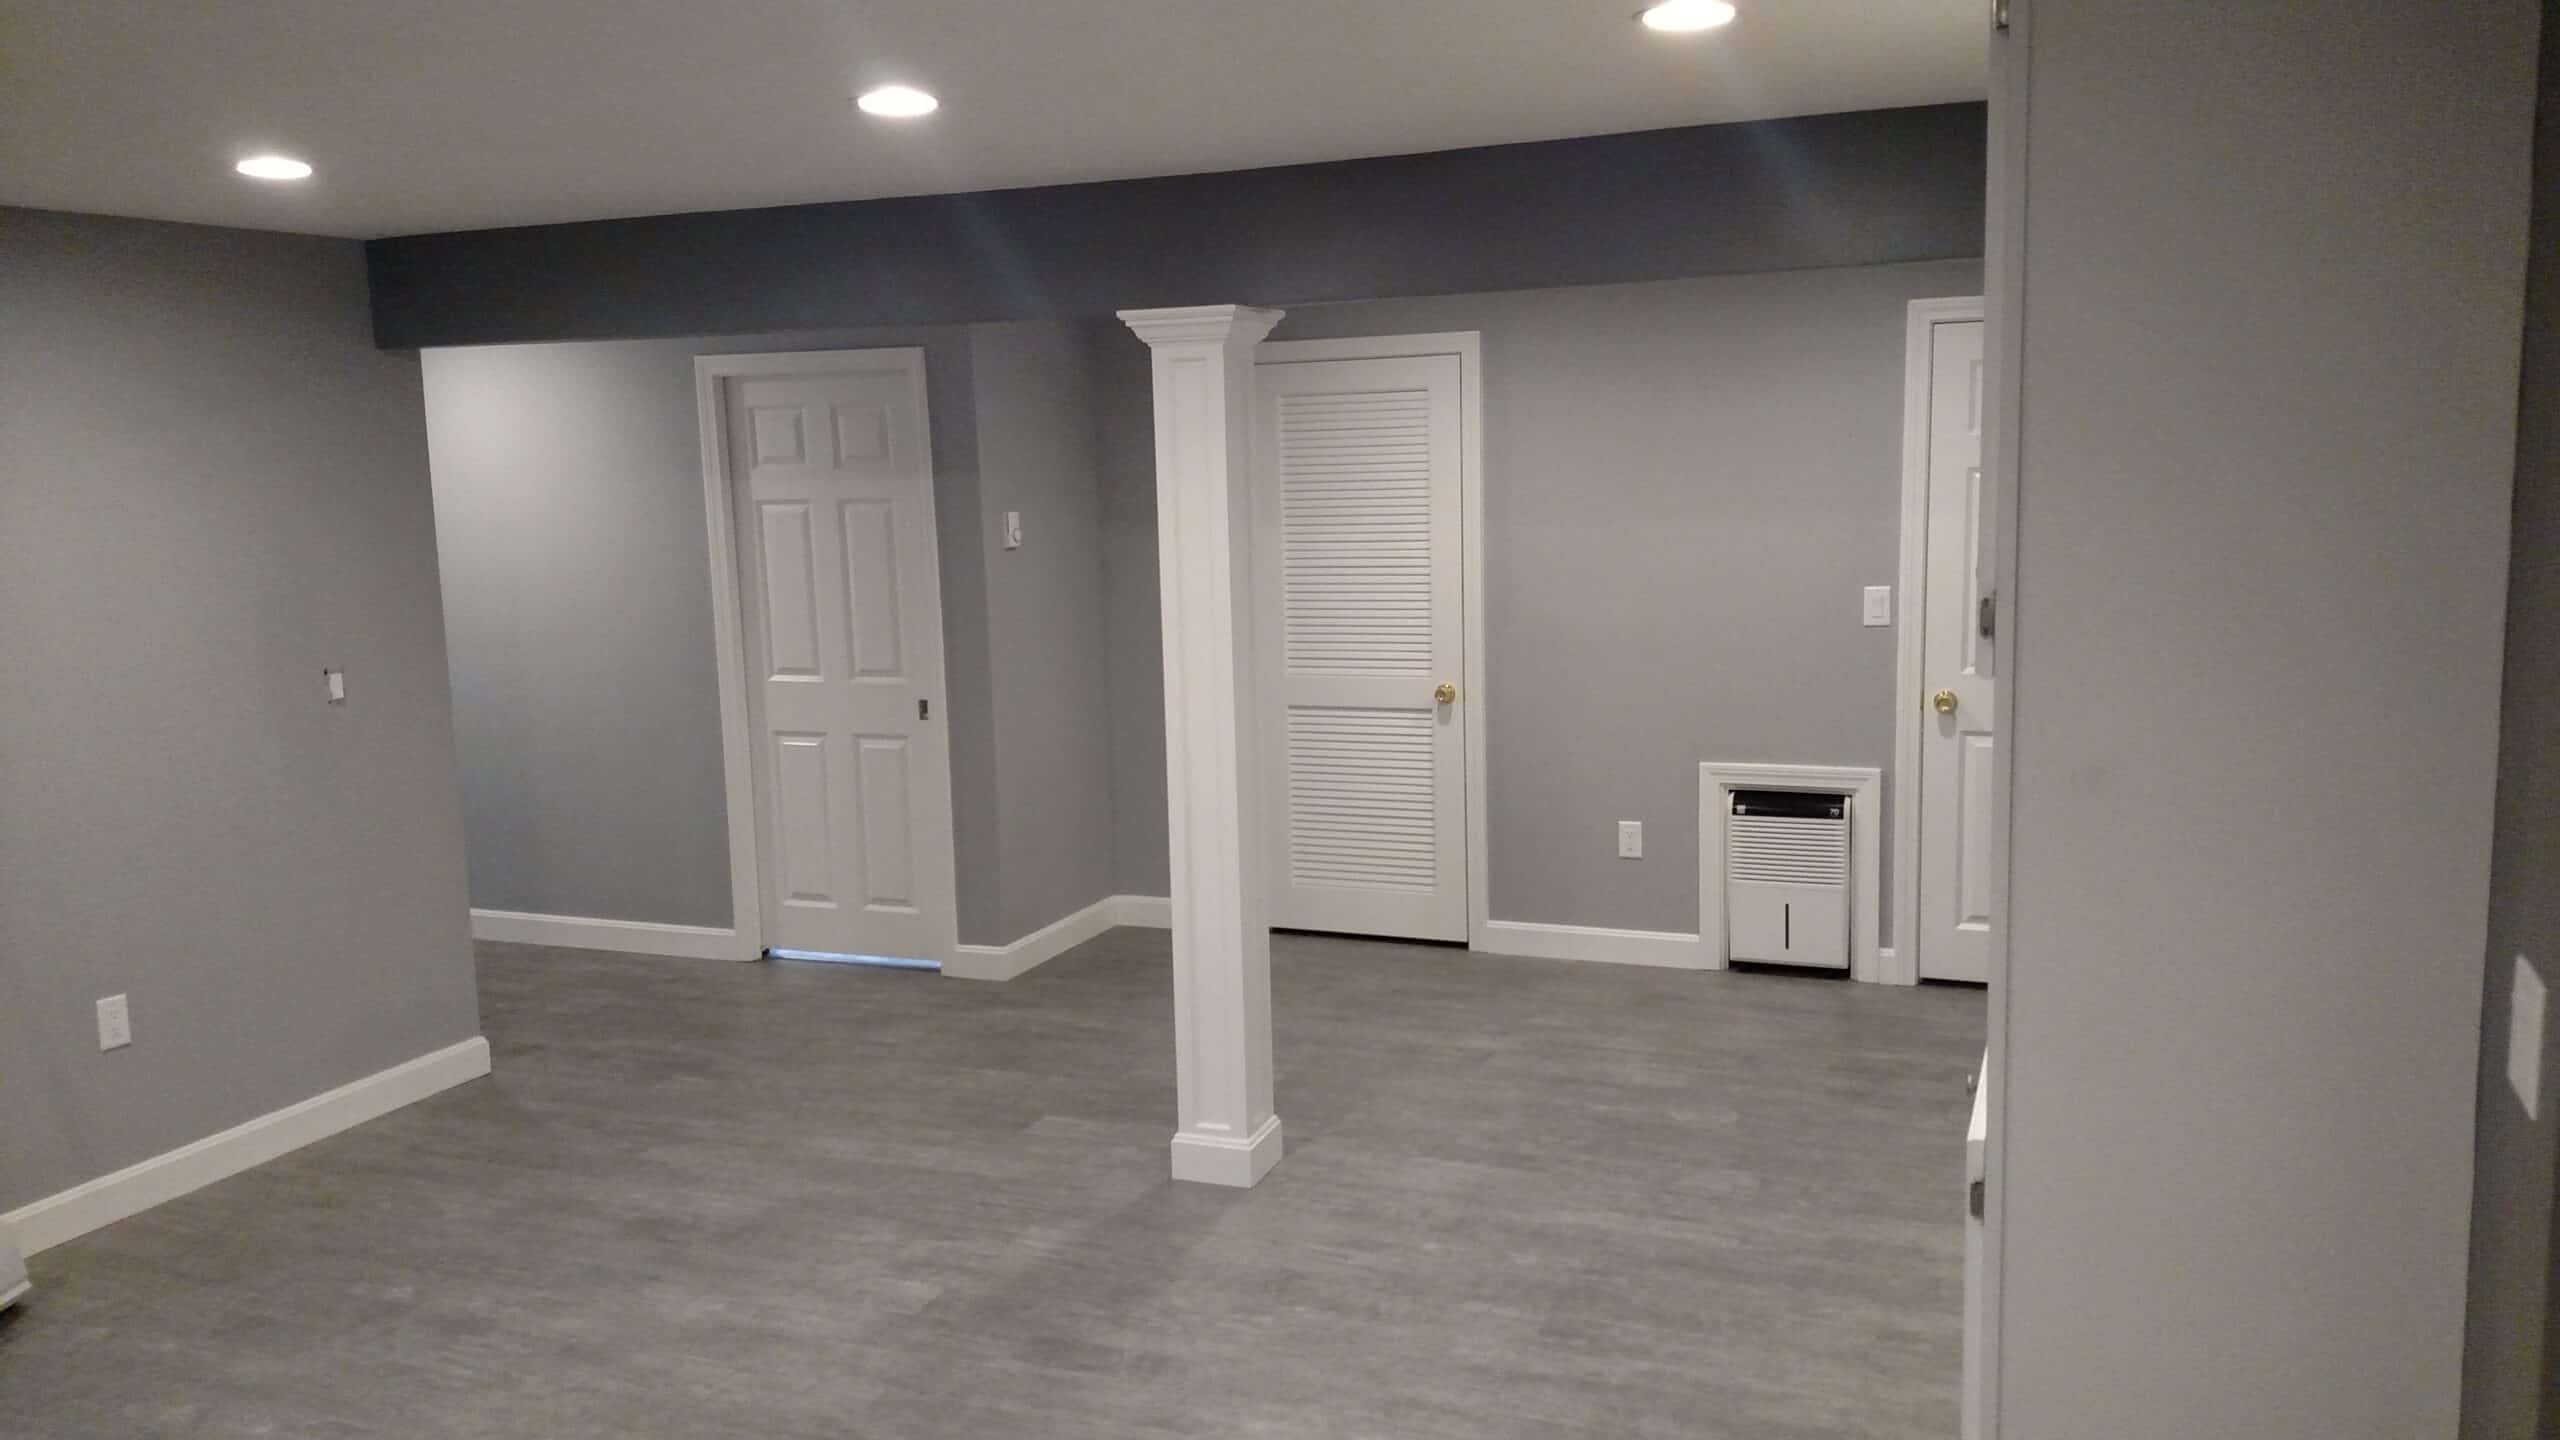 Basement Remodeling Services from McNeill & Son